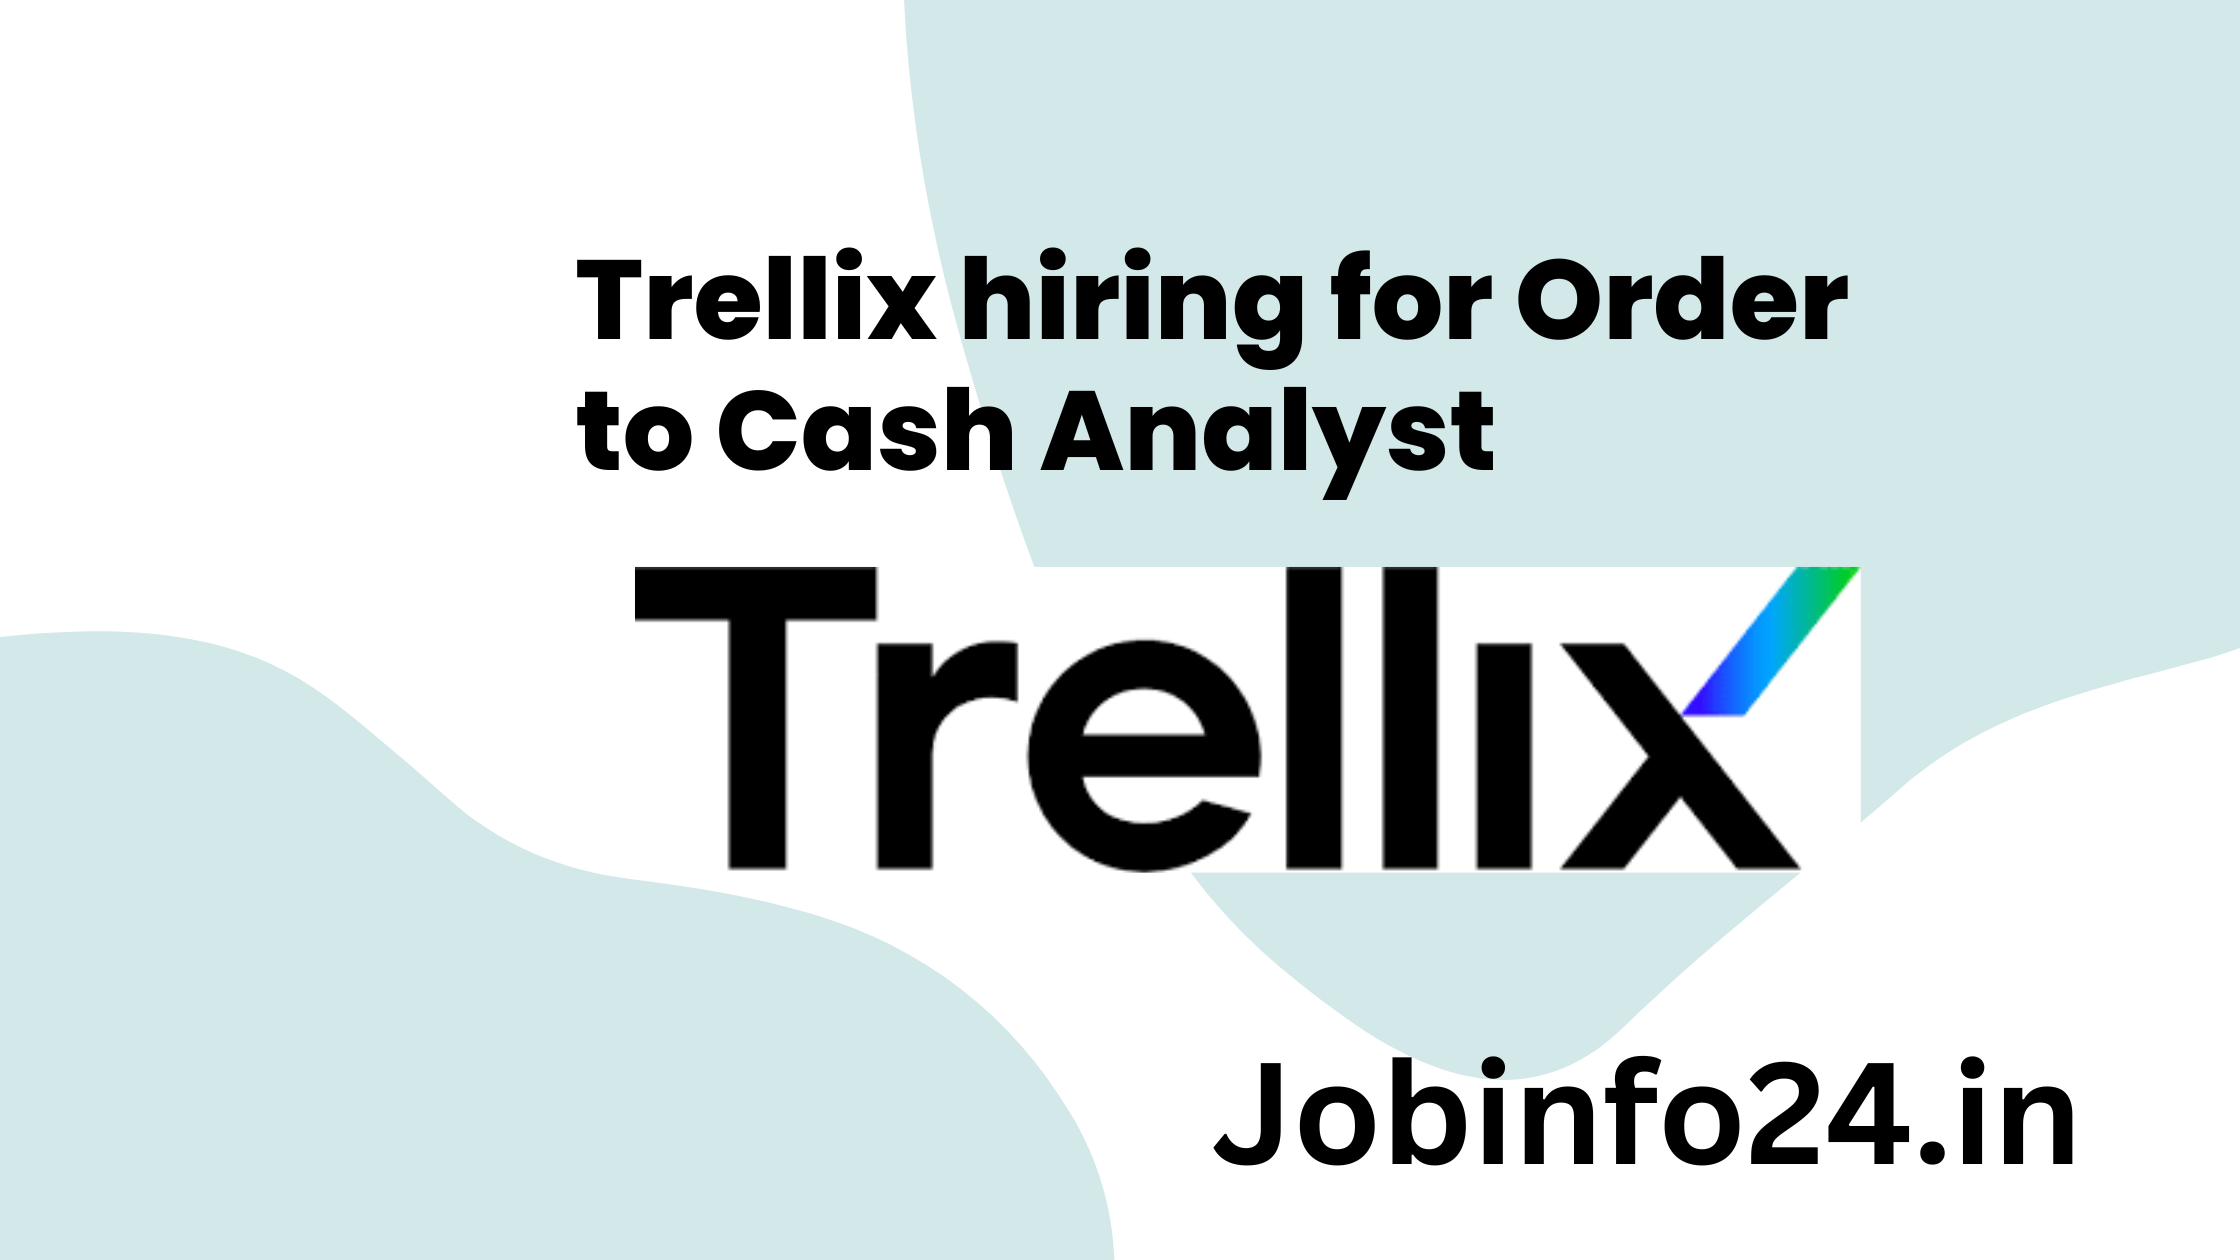 Trellix hiring for Order to Cash Analyst